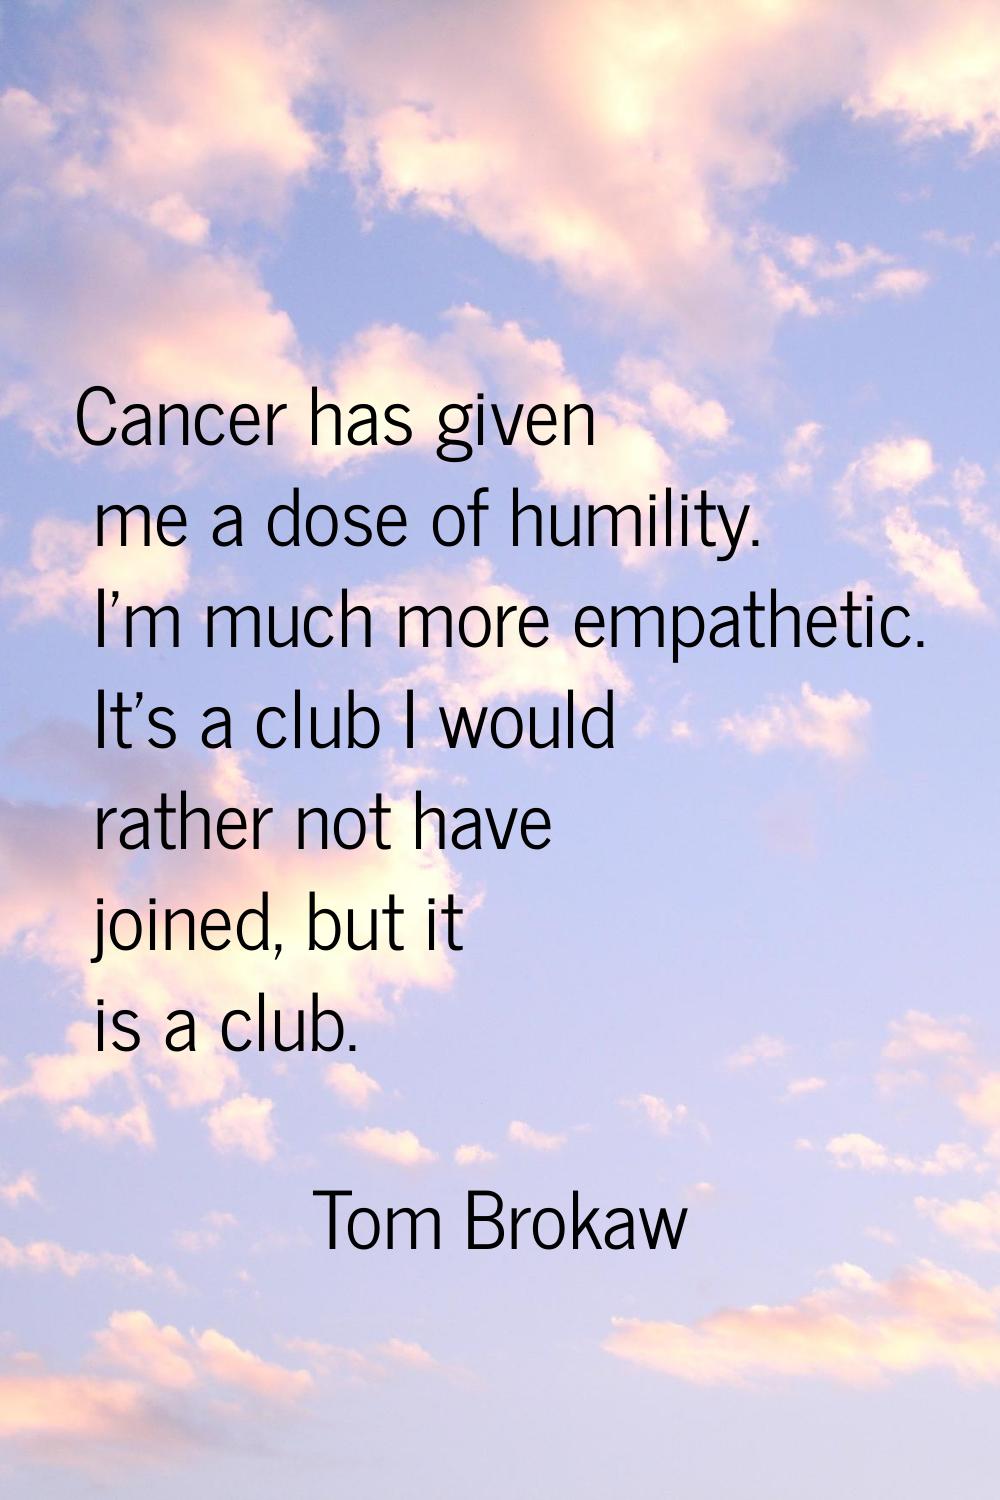 Cancer has given me a dose of humility. I'm much more empathetic. It's a club I would rather not ha